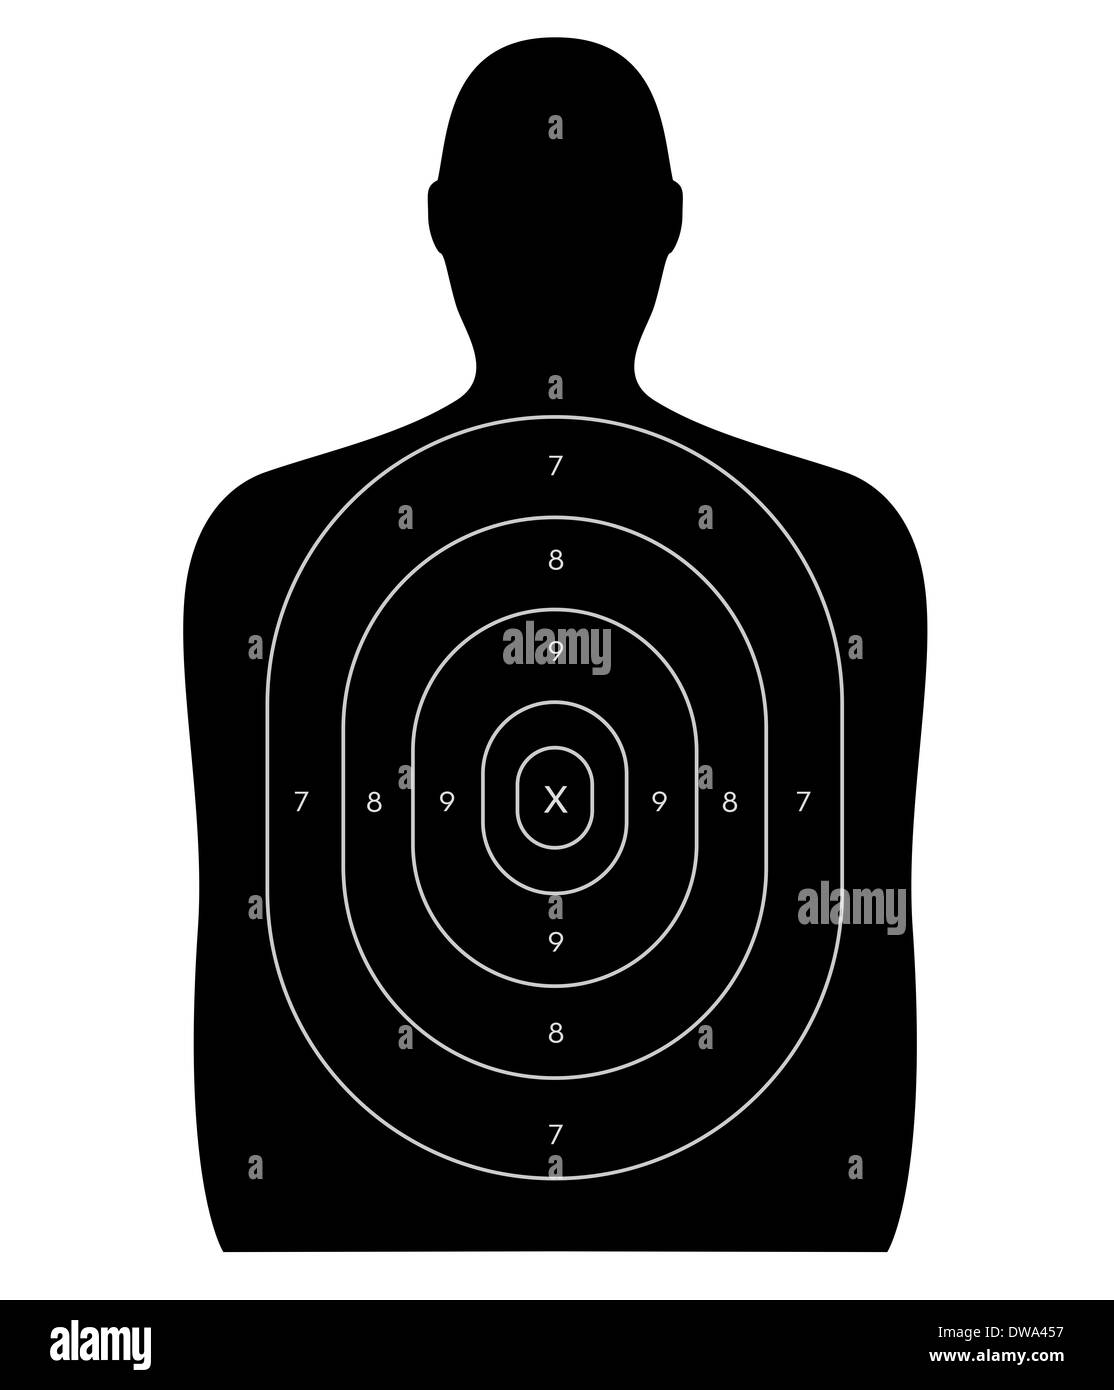 Gun firing range target shaped like a human, blank with no bullet hole. Isolated on a white background with clipping path. Stock Photo